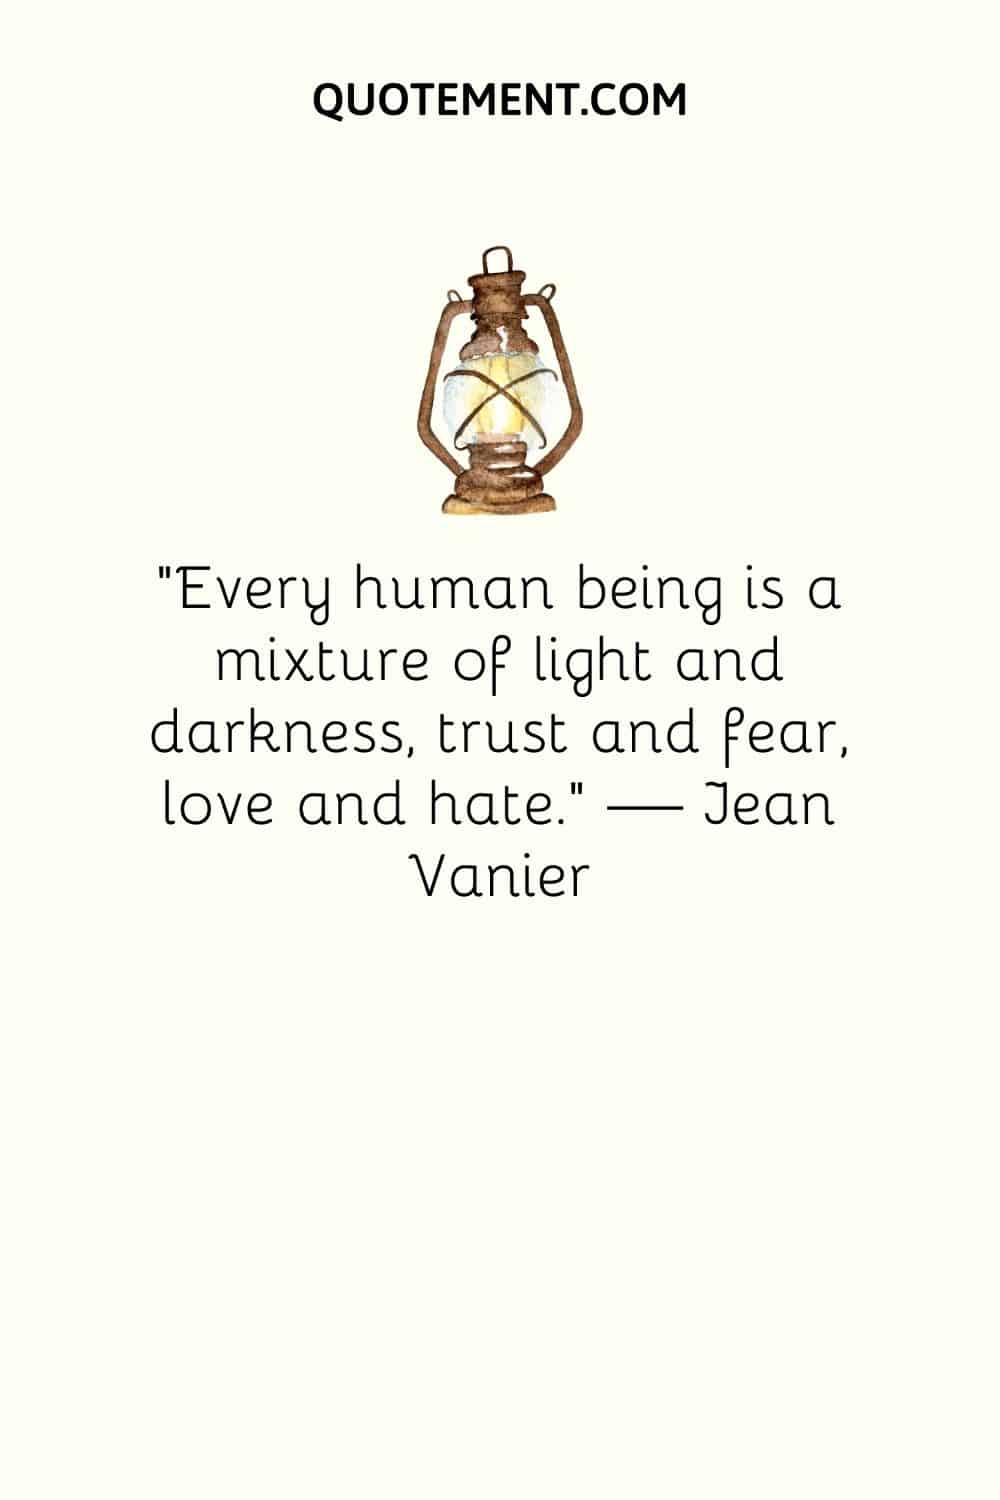 “Every human being is a mixture of light and darkness, trust and fear, love and hate.” — Jean Vanier